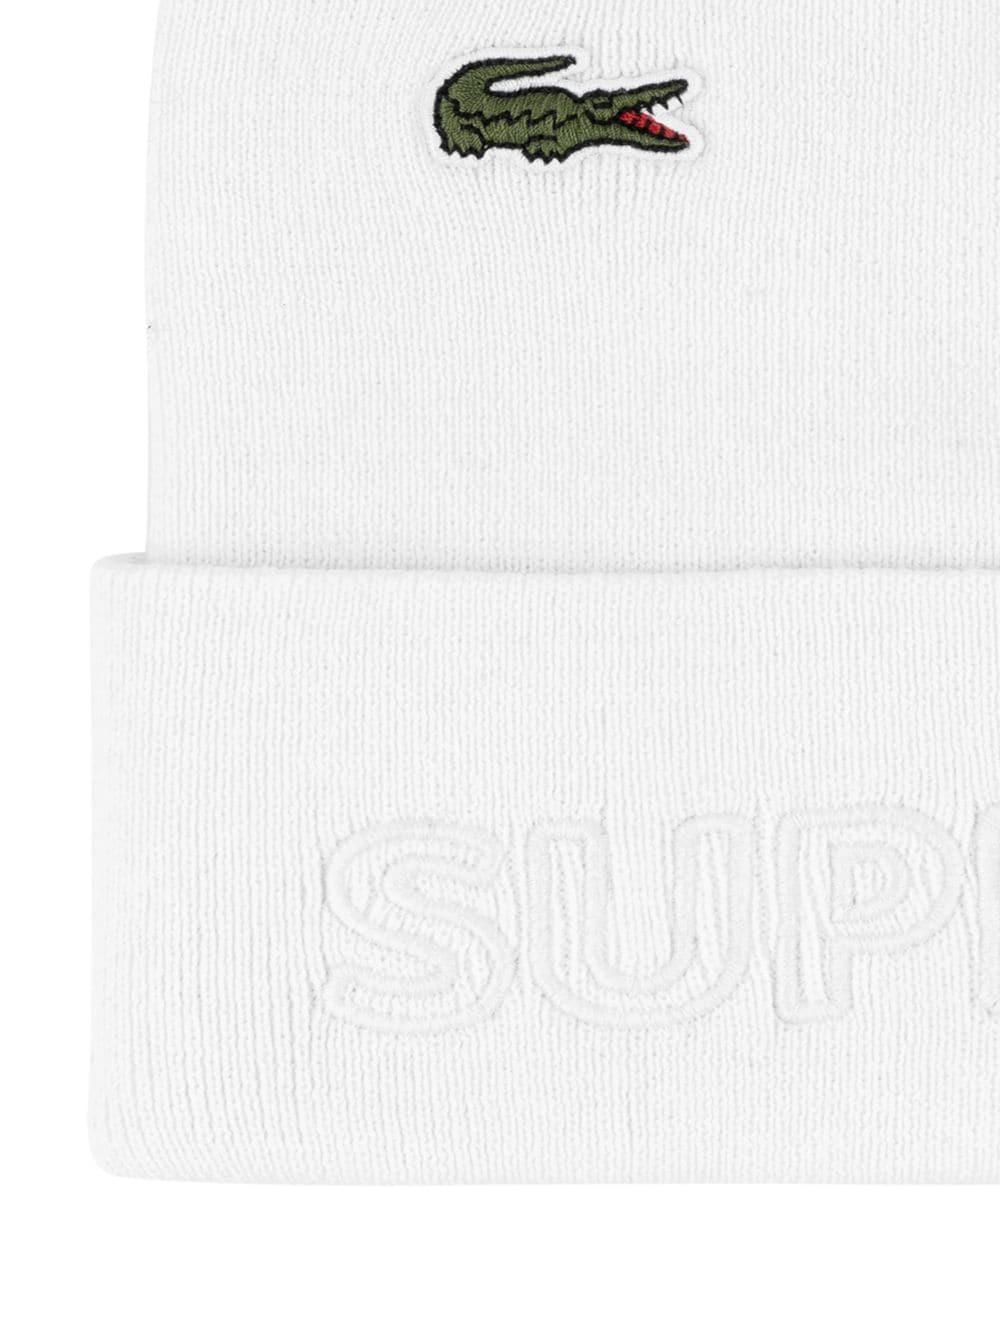 Supreme X Lacoste Knitted Beanie Hat in White | Lyst